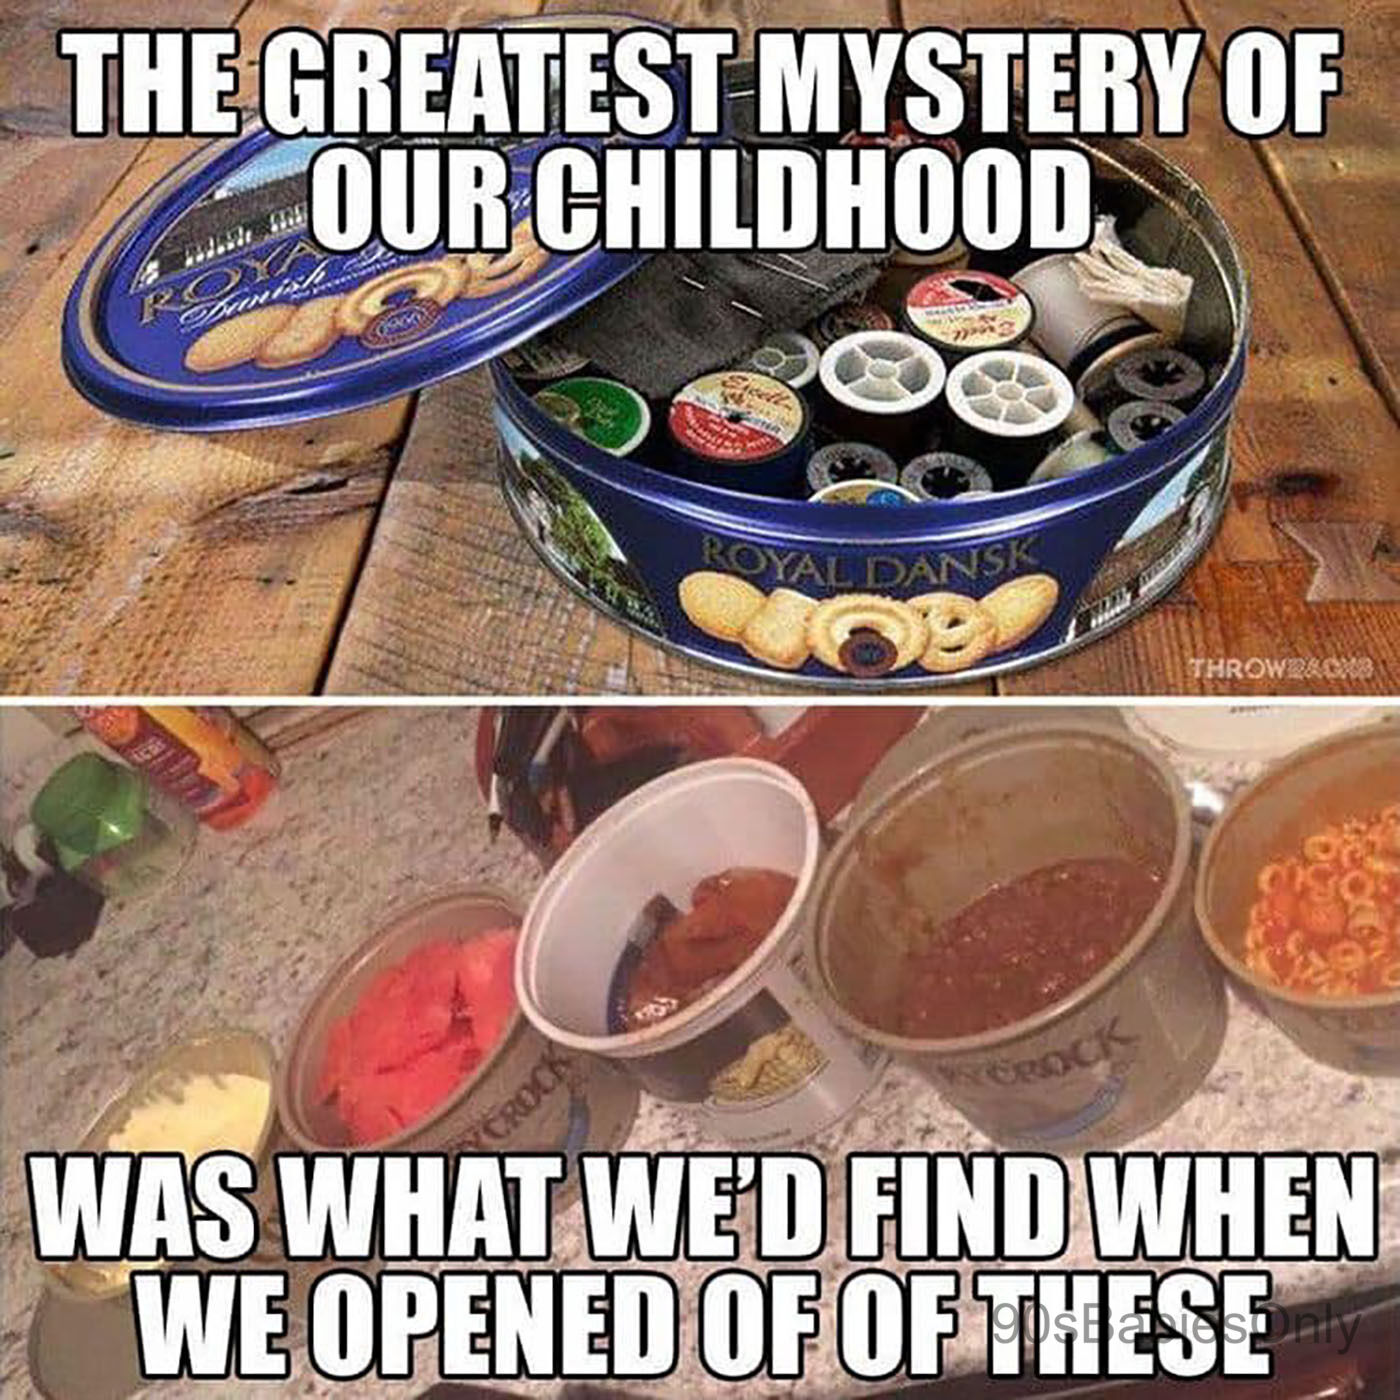 A two-photo collage. The top one shows an open container of Royal Dansk cookies but inside is sewing supplies. The bottom one shows various butter containers with leftover food inside.

Text on the images: The greatest mystery of our childhood was what we'd find when we opened one of these